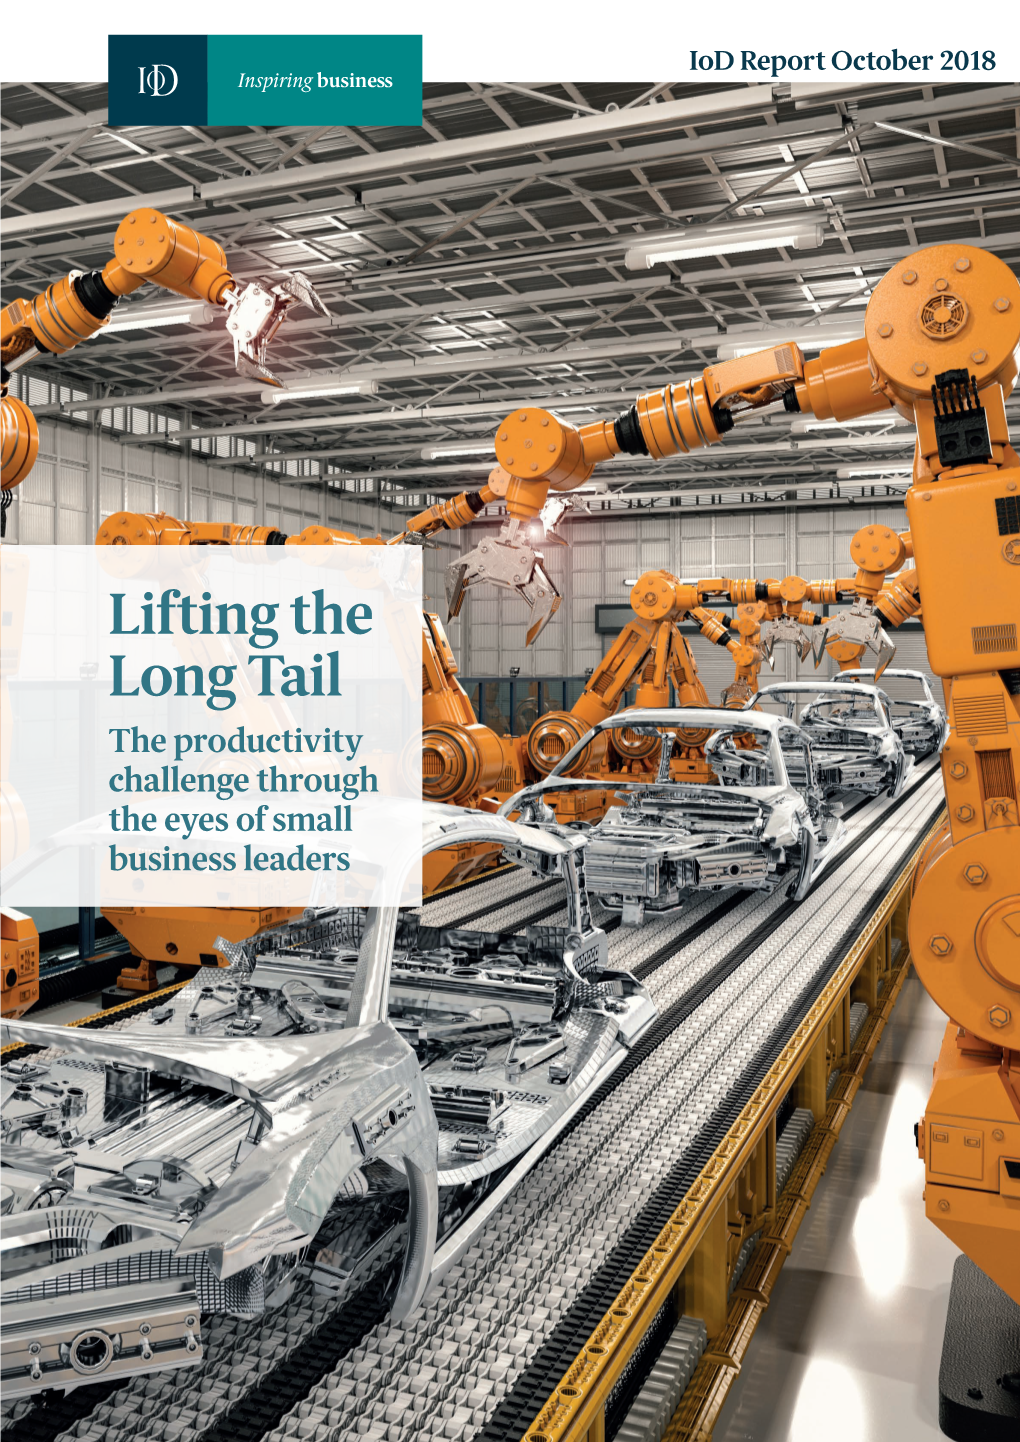 Lifting the Long Tail: the Productivity Challenge Through the Eyes of Small Business Leaders